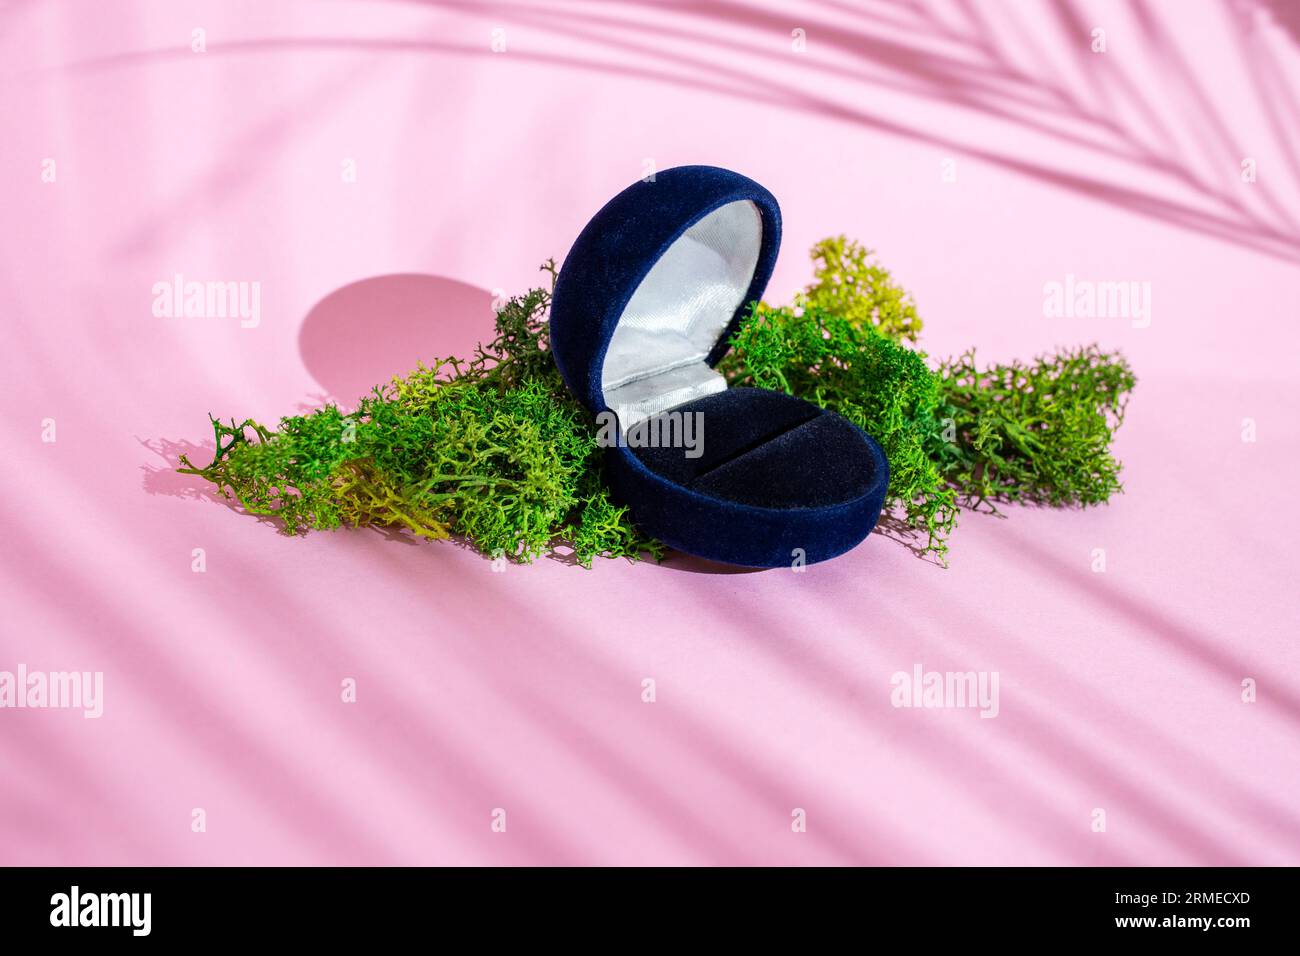 Empty jewelry box on stabilized lichen moss and pink background with palm leaves shadows, minimal backdrop for product placement Stock Photo